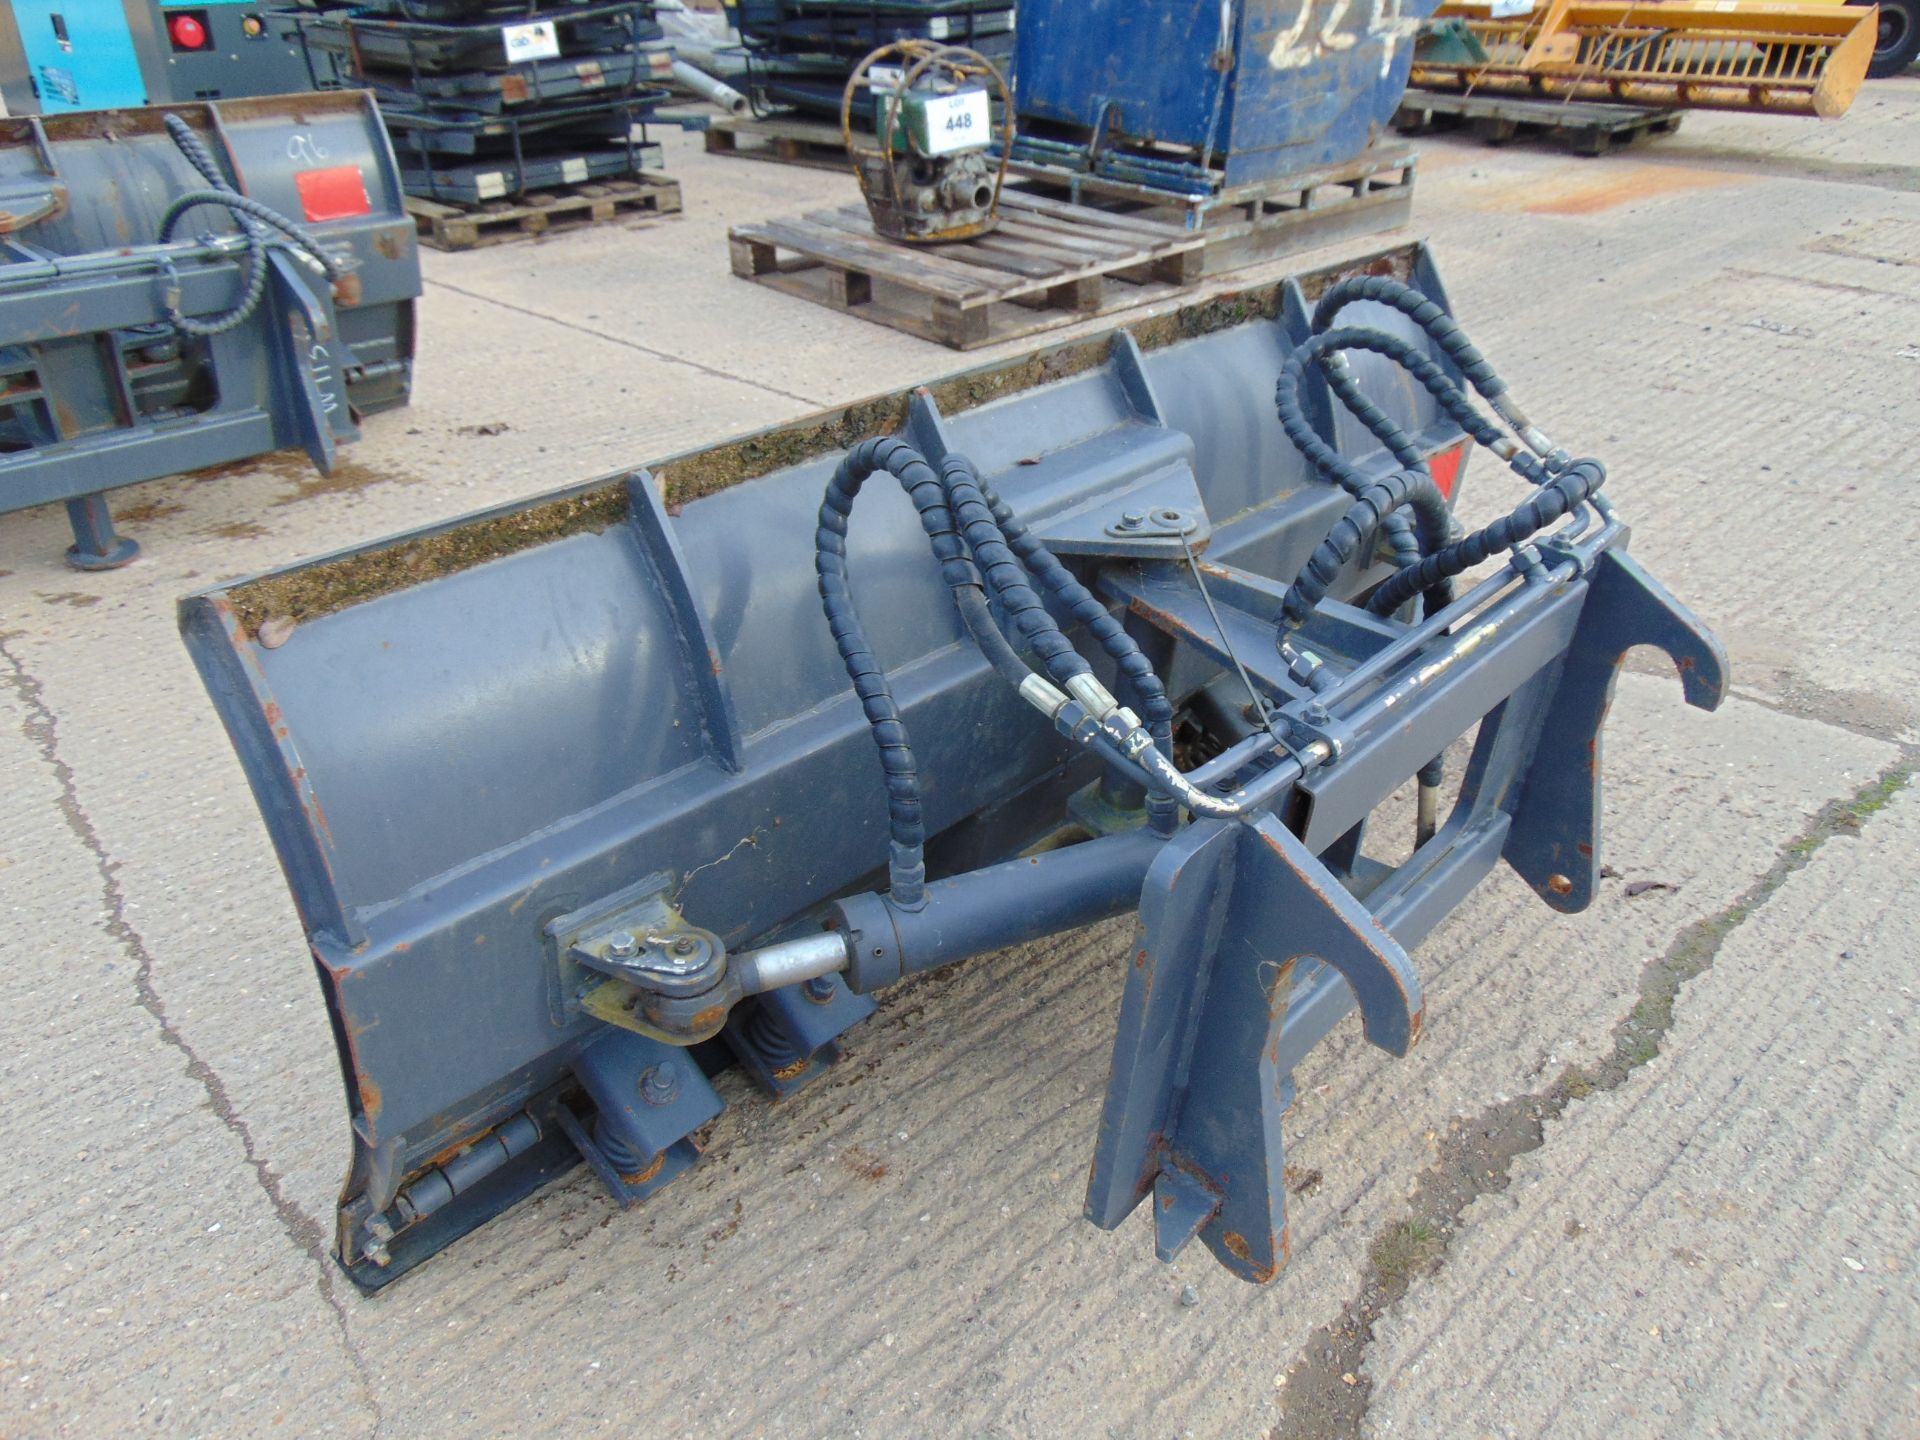 6' Hydraulic Snow Plough Blade for Telehandler, Forklift, Tractor Etc - Image 3 of 7